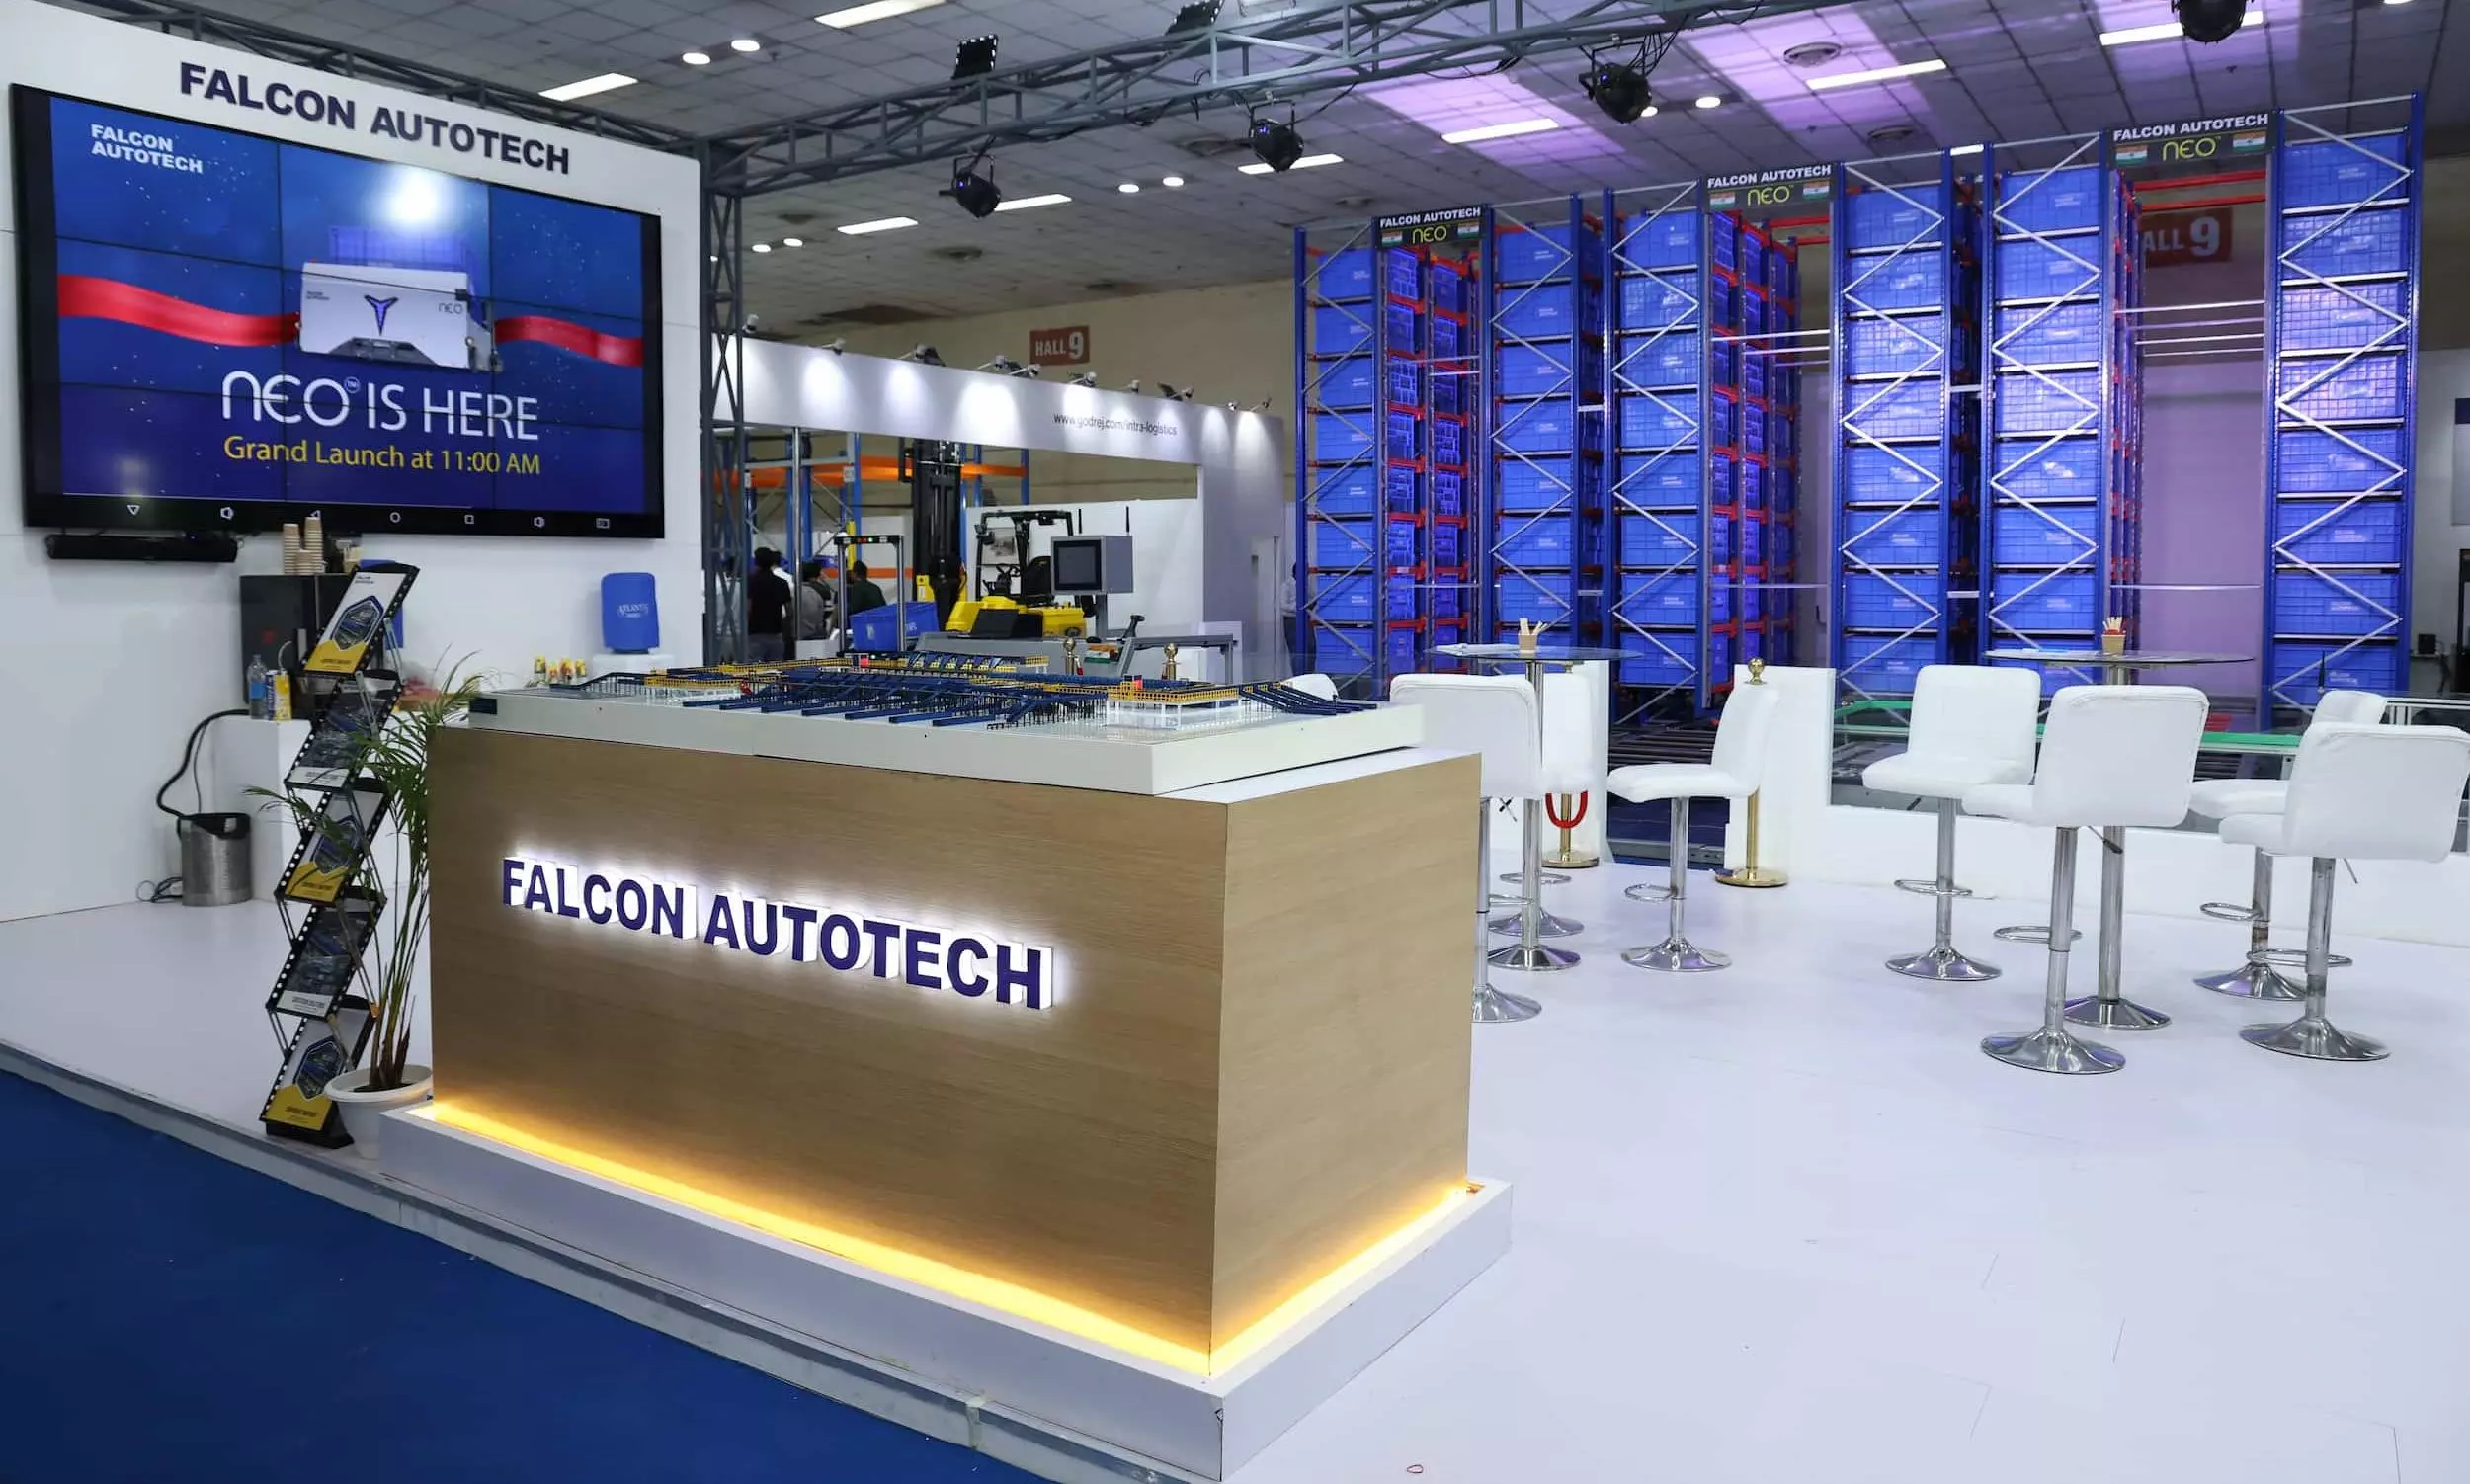 Falcon Autotech launches NEO for warehousing automation